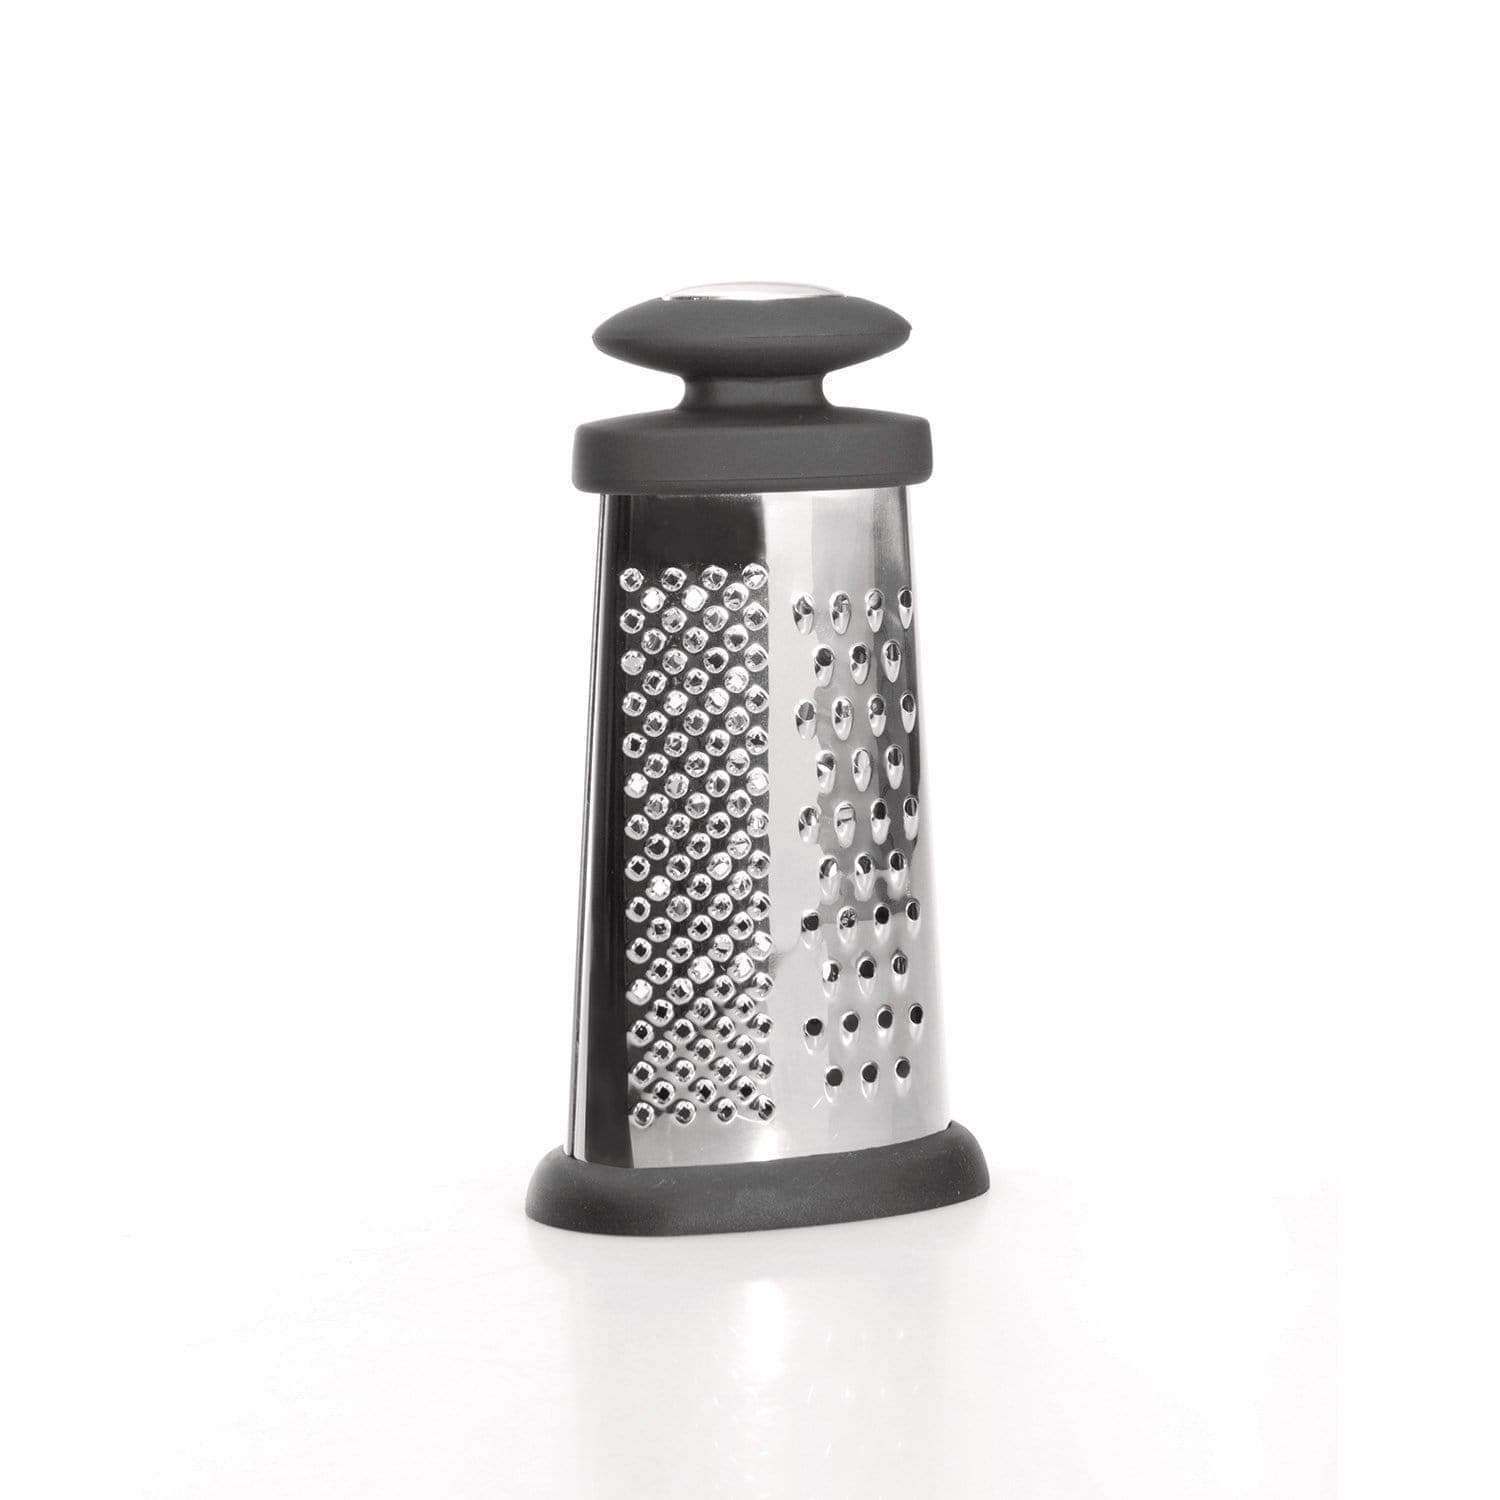 ESSENTIAL OVAL GRATER - 1100194 - 1100194